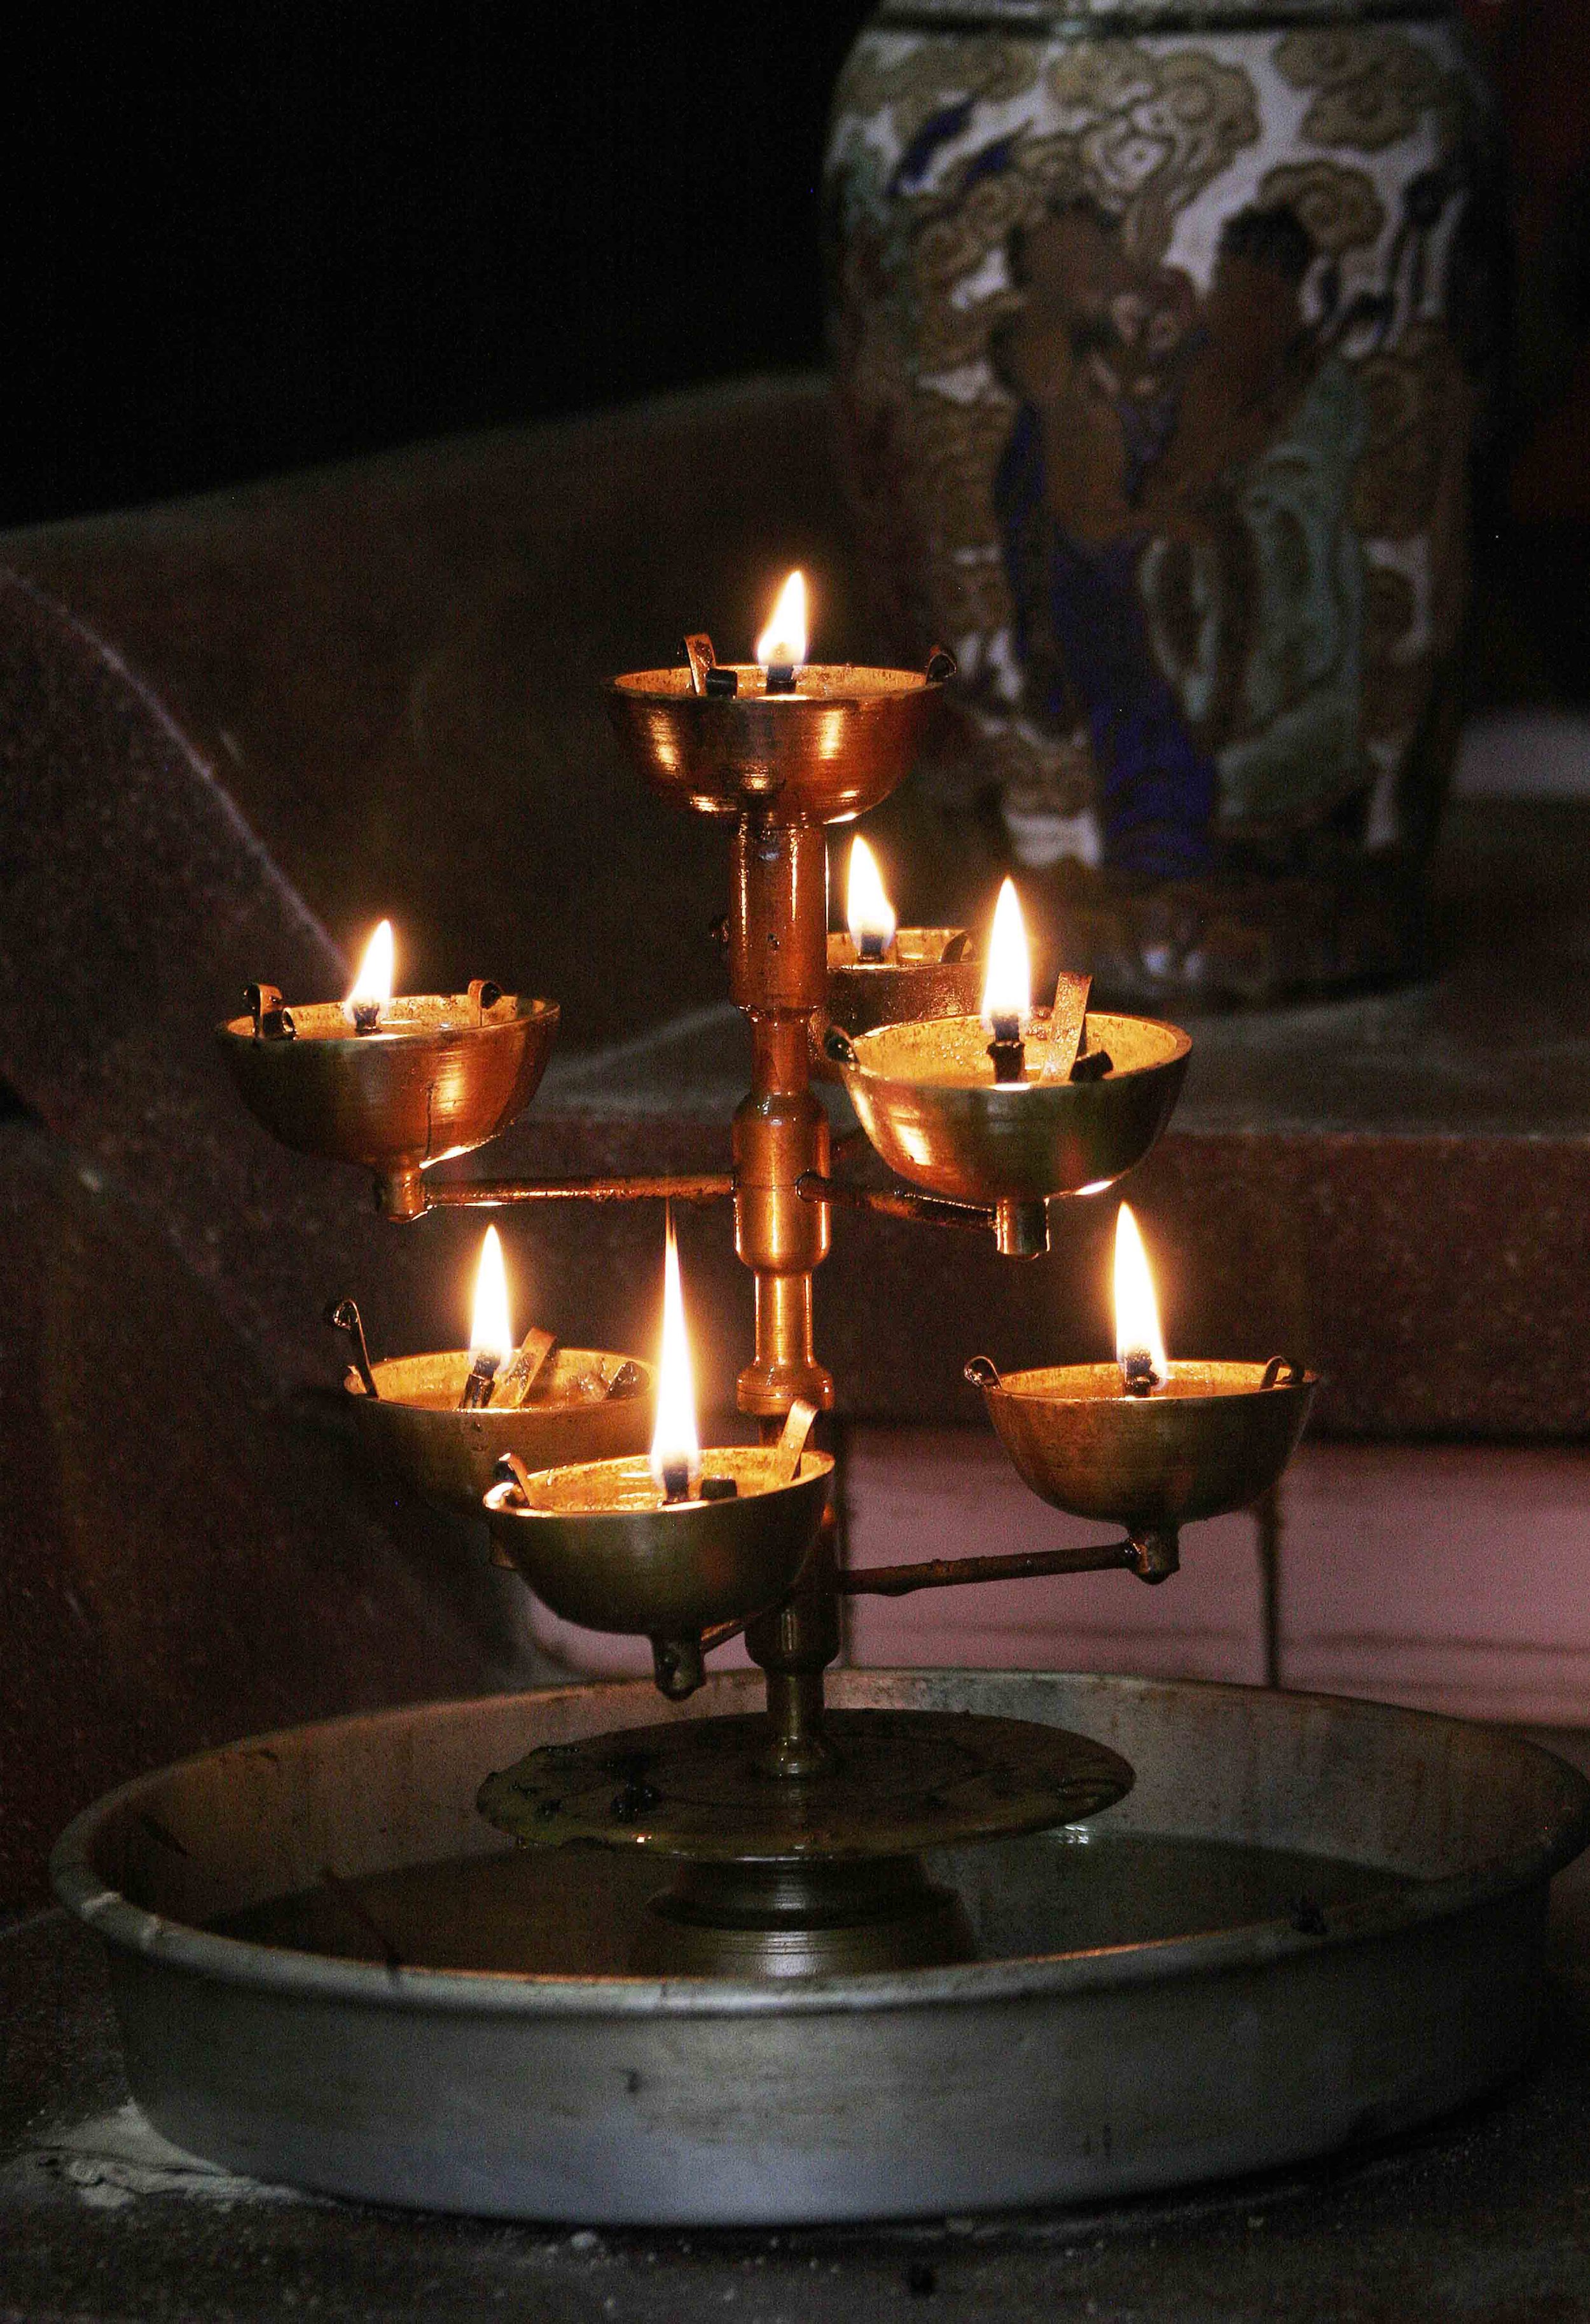 A-B Temple Candles 13x19 Color.jpg